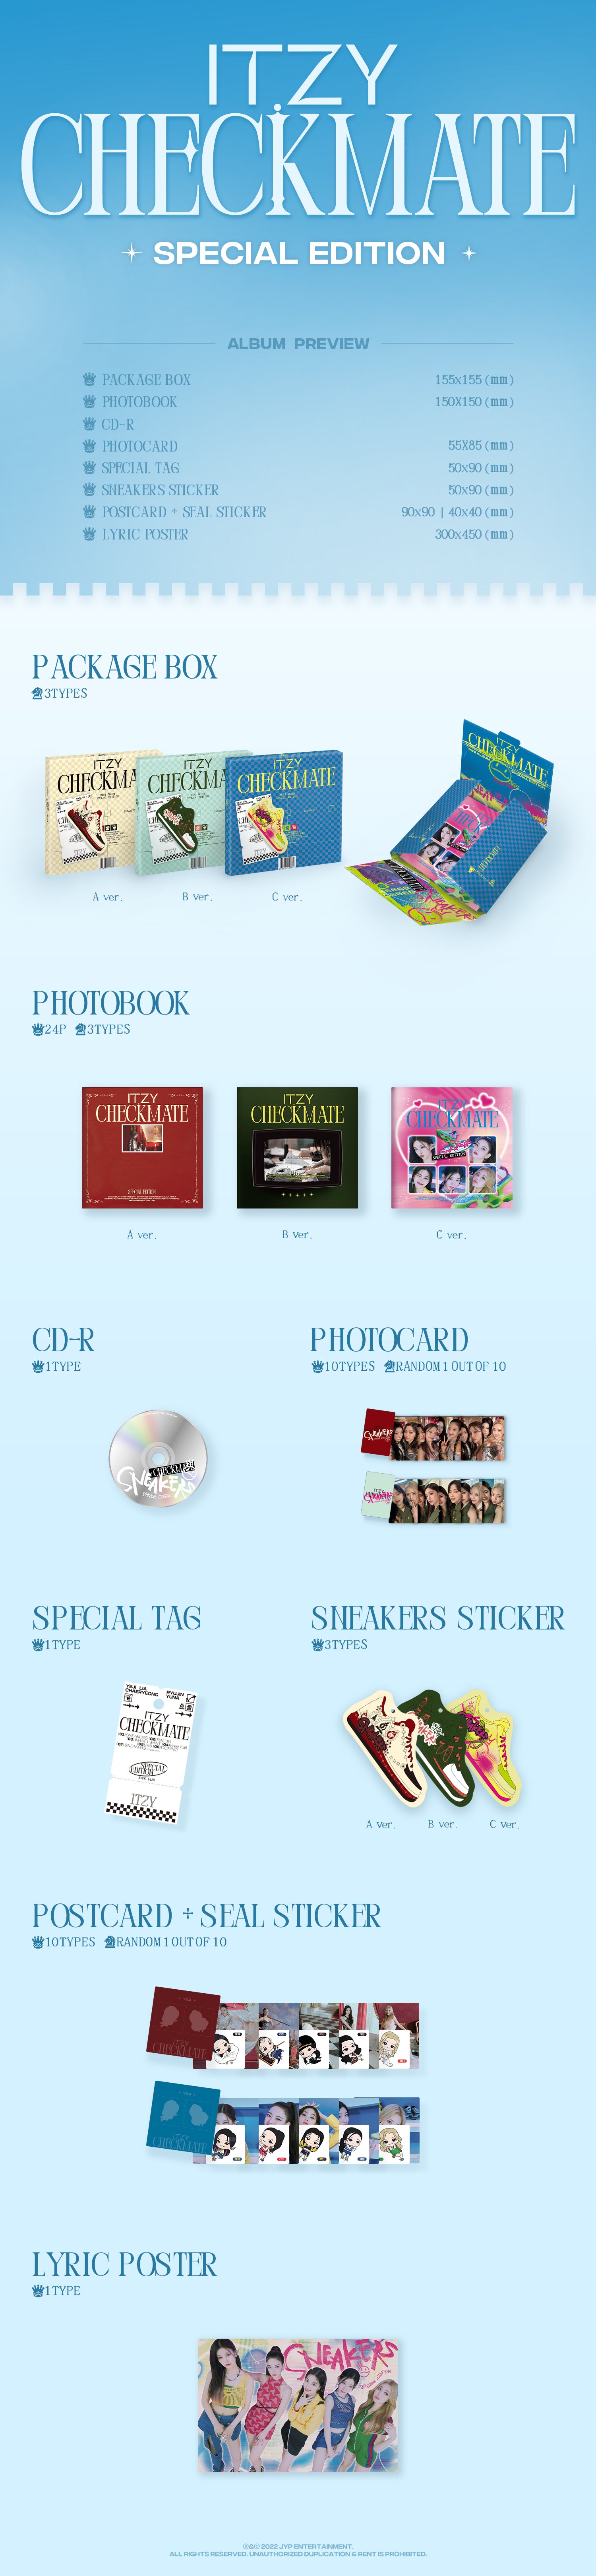 ITZY Mini Album 'Checkmate' (Special Edition) l PLAY KPOP CAFE